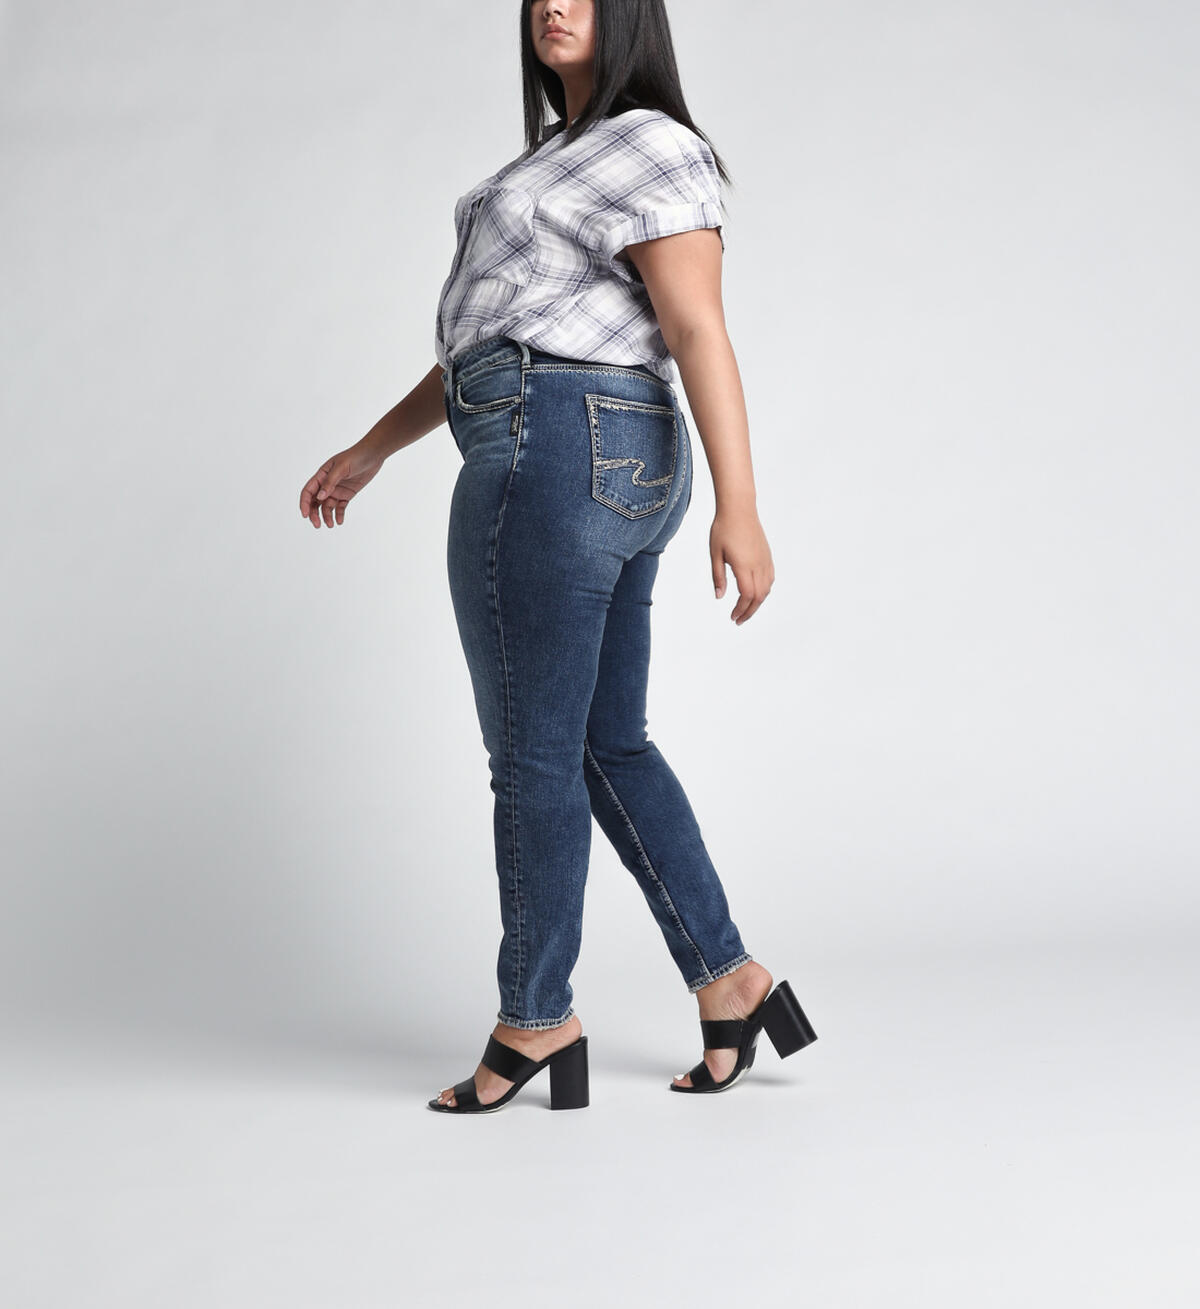 Avery High Rise Skinny Leg Jeans, , hi-res image number 2